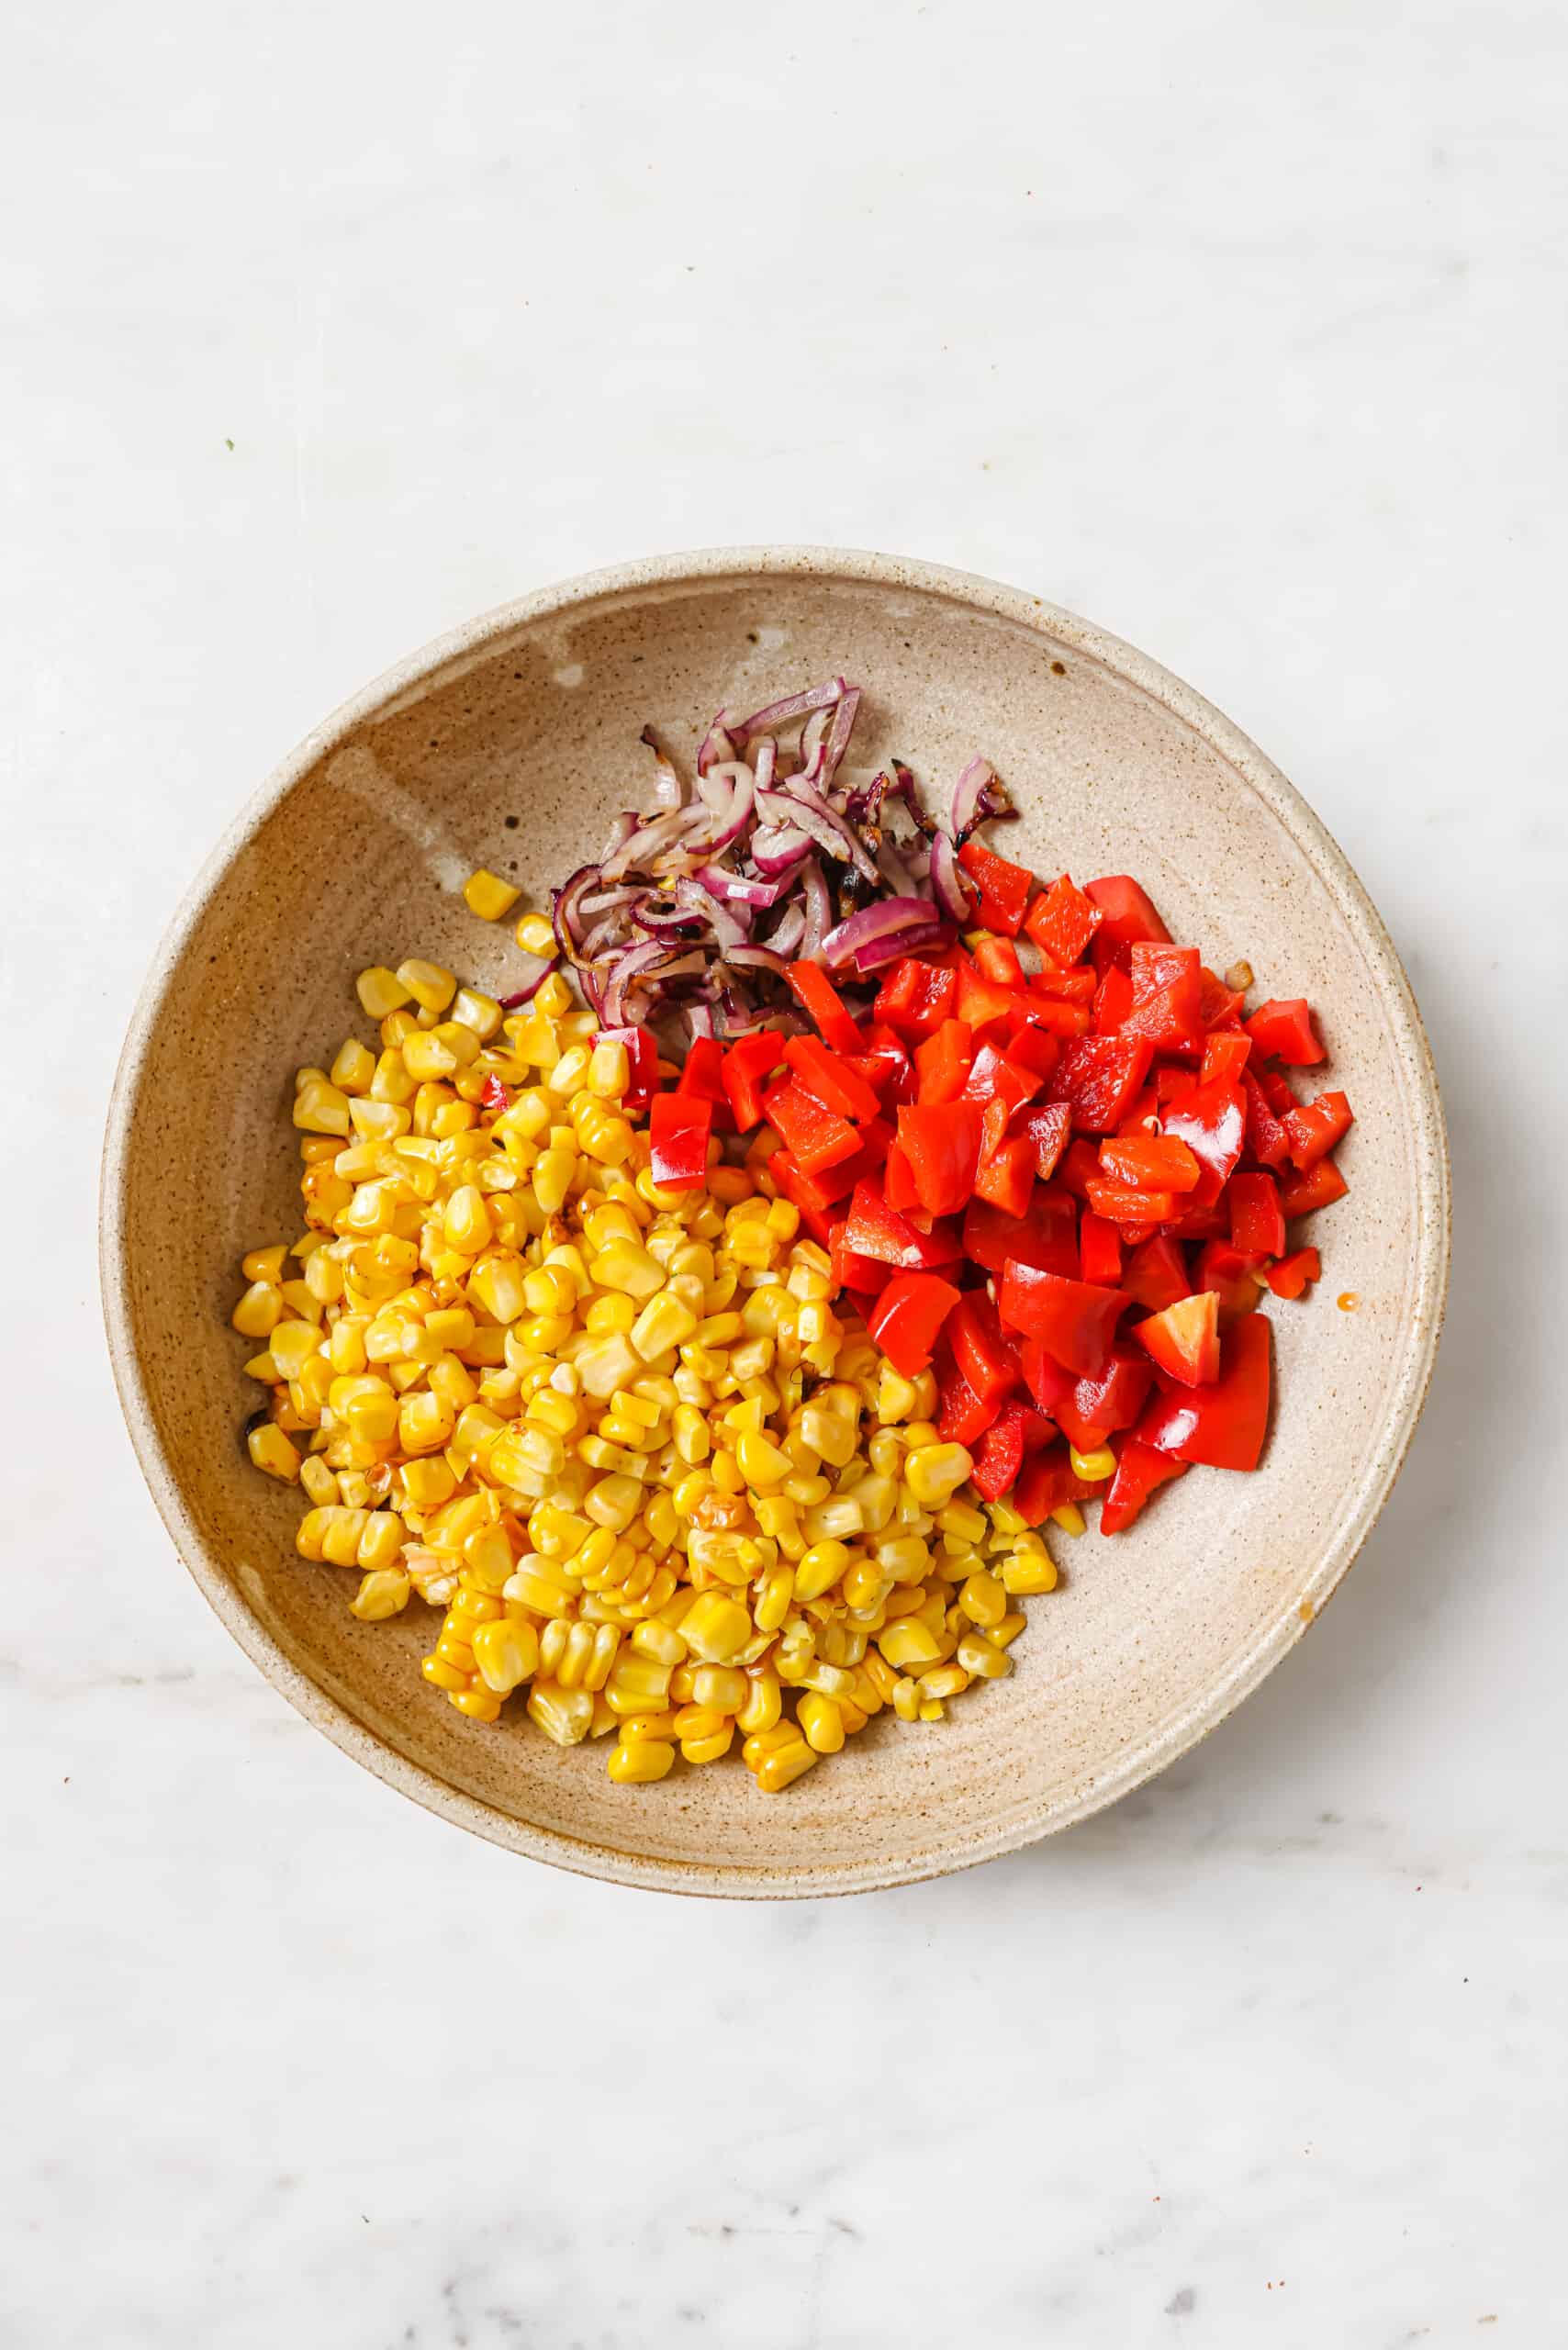 Chopped grilled veggies in a bowl.